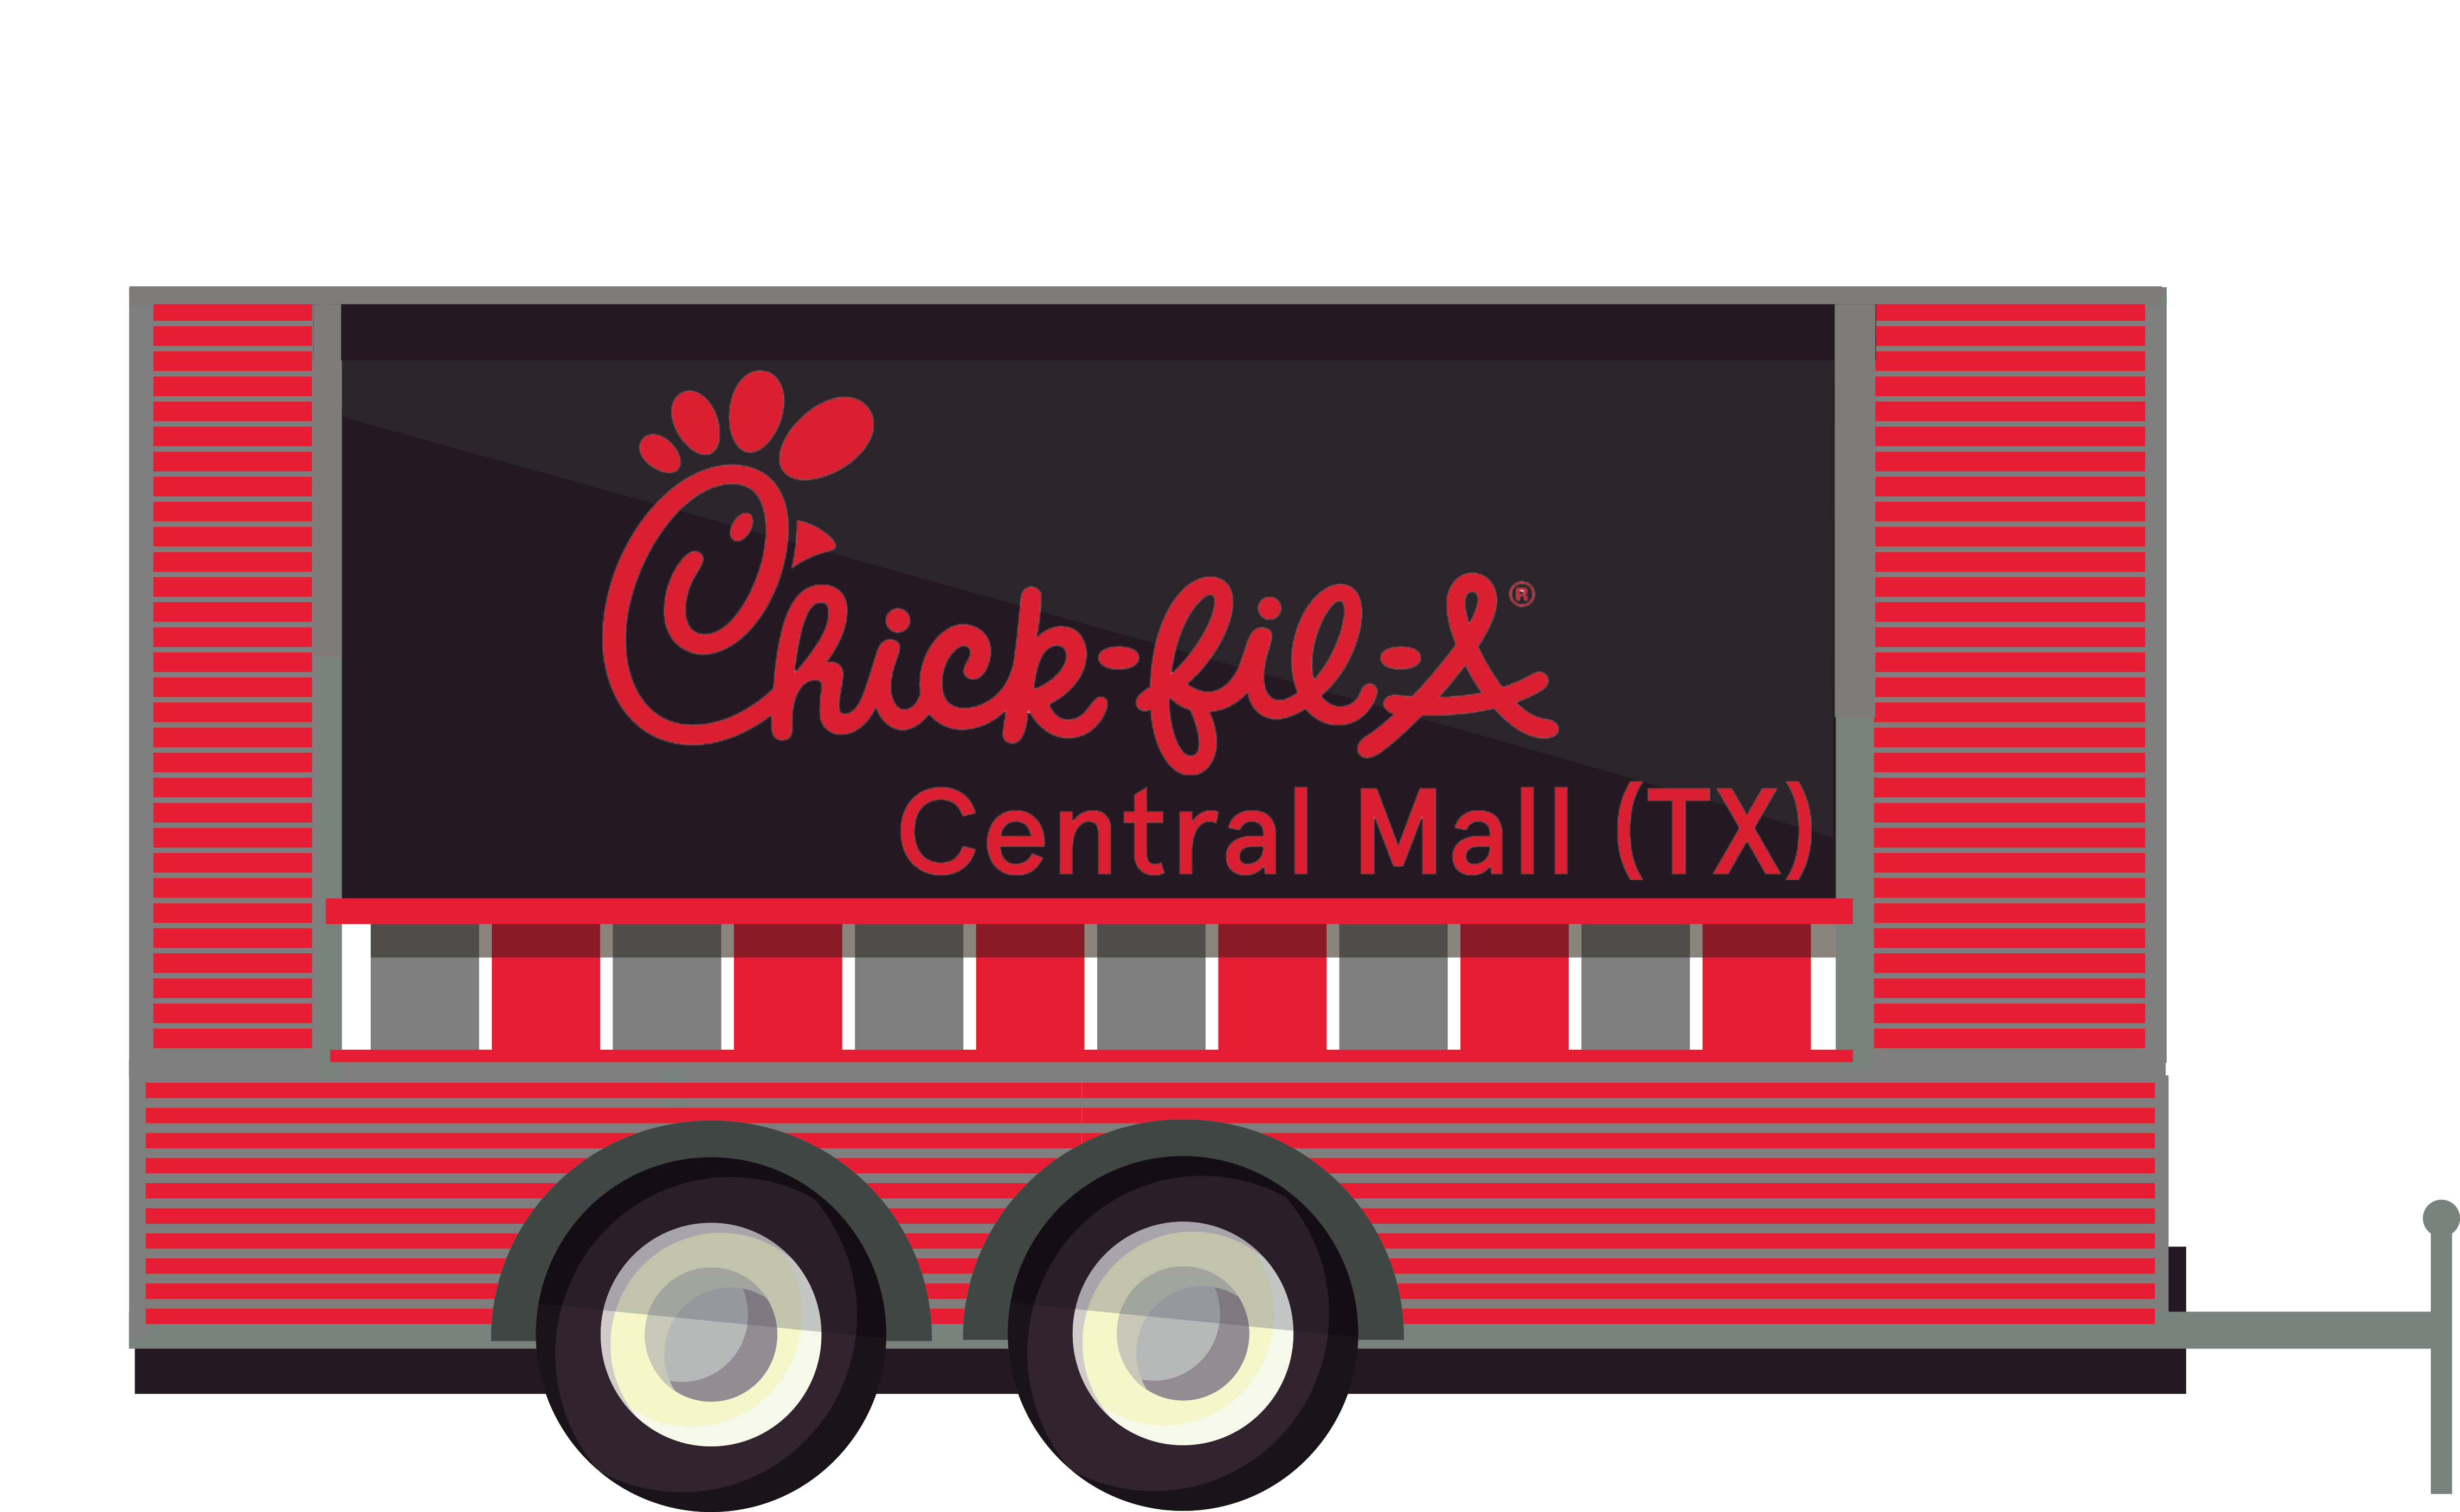 Chick-fil-A Central Mall (TX) food truck profile image